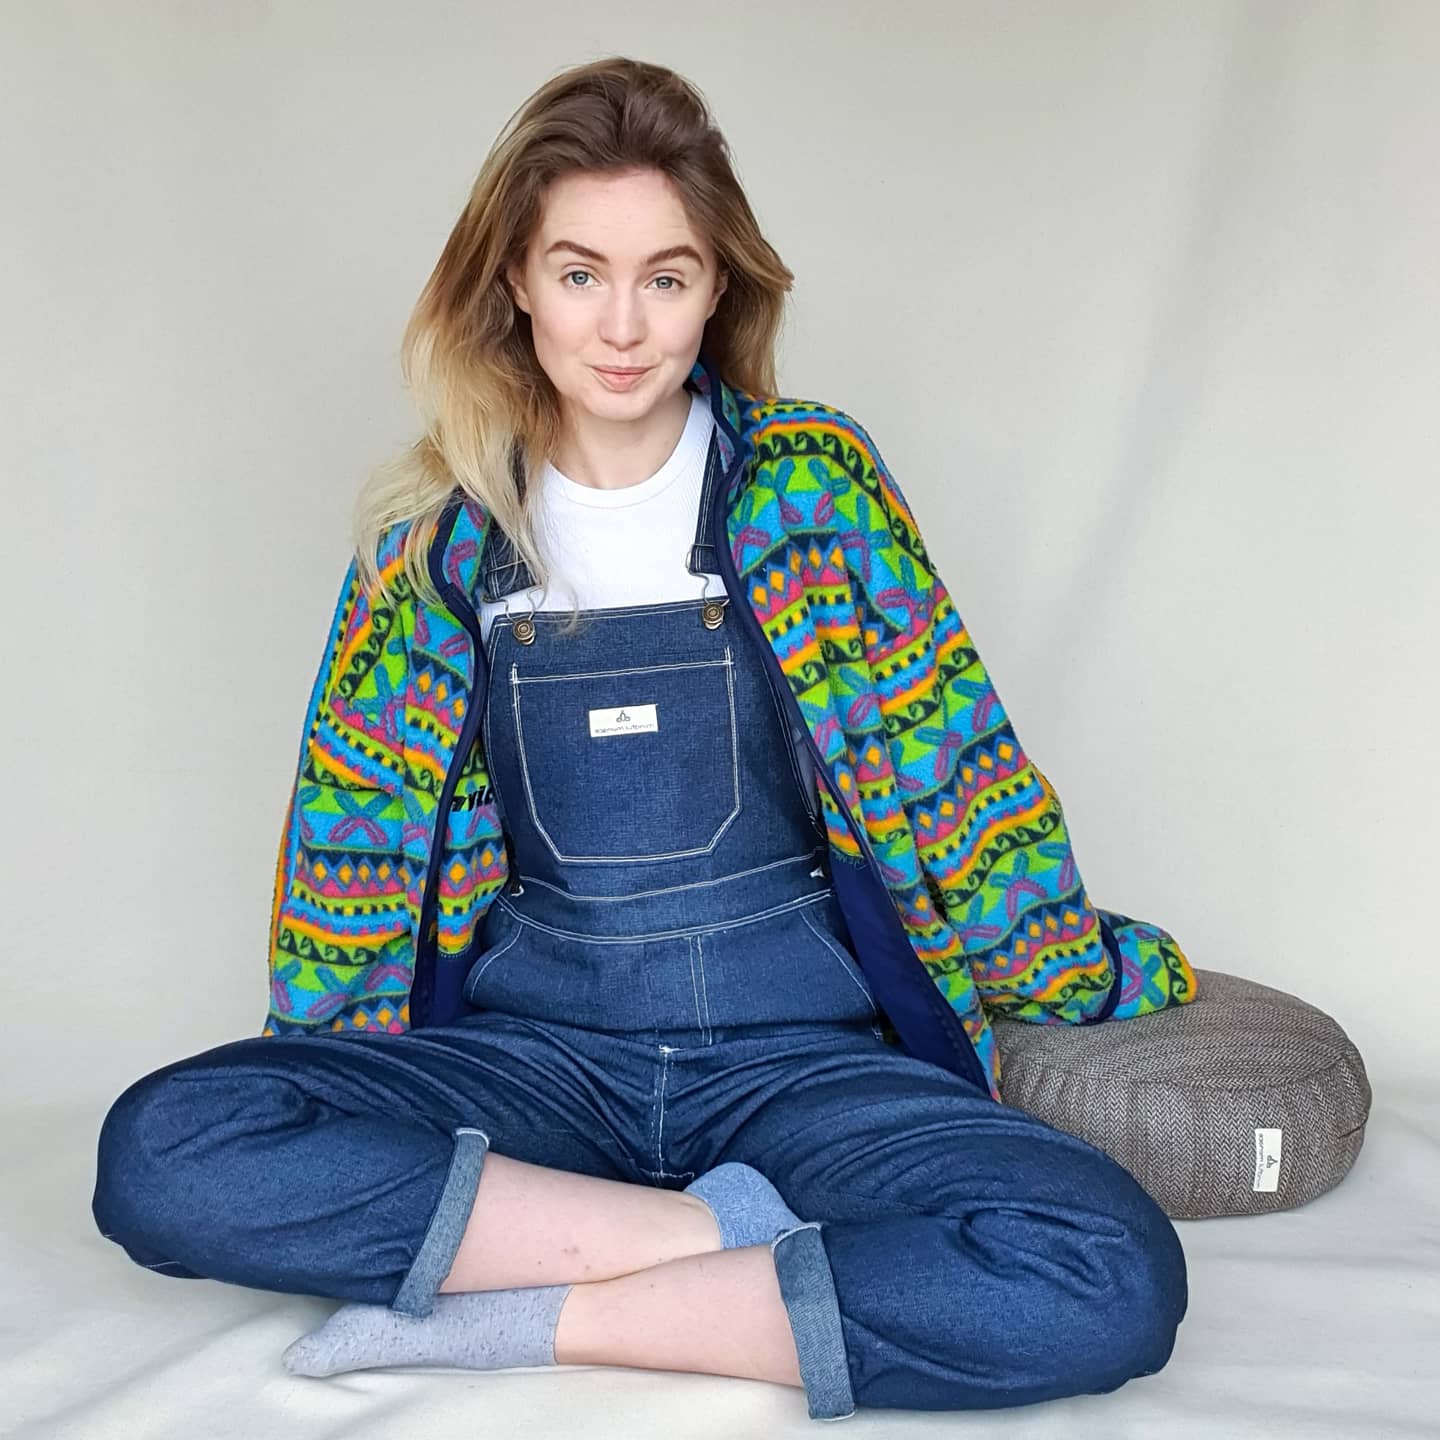 Handmade Dungarees and Vibrant Vintage Fleece Outfit